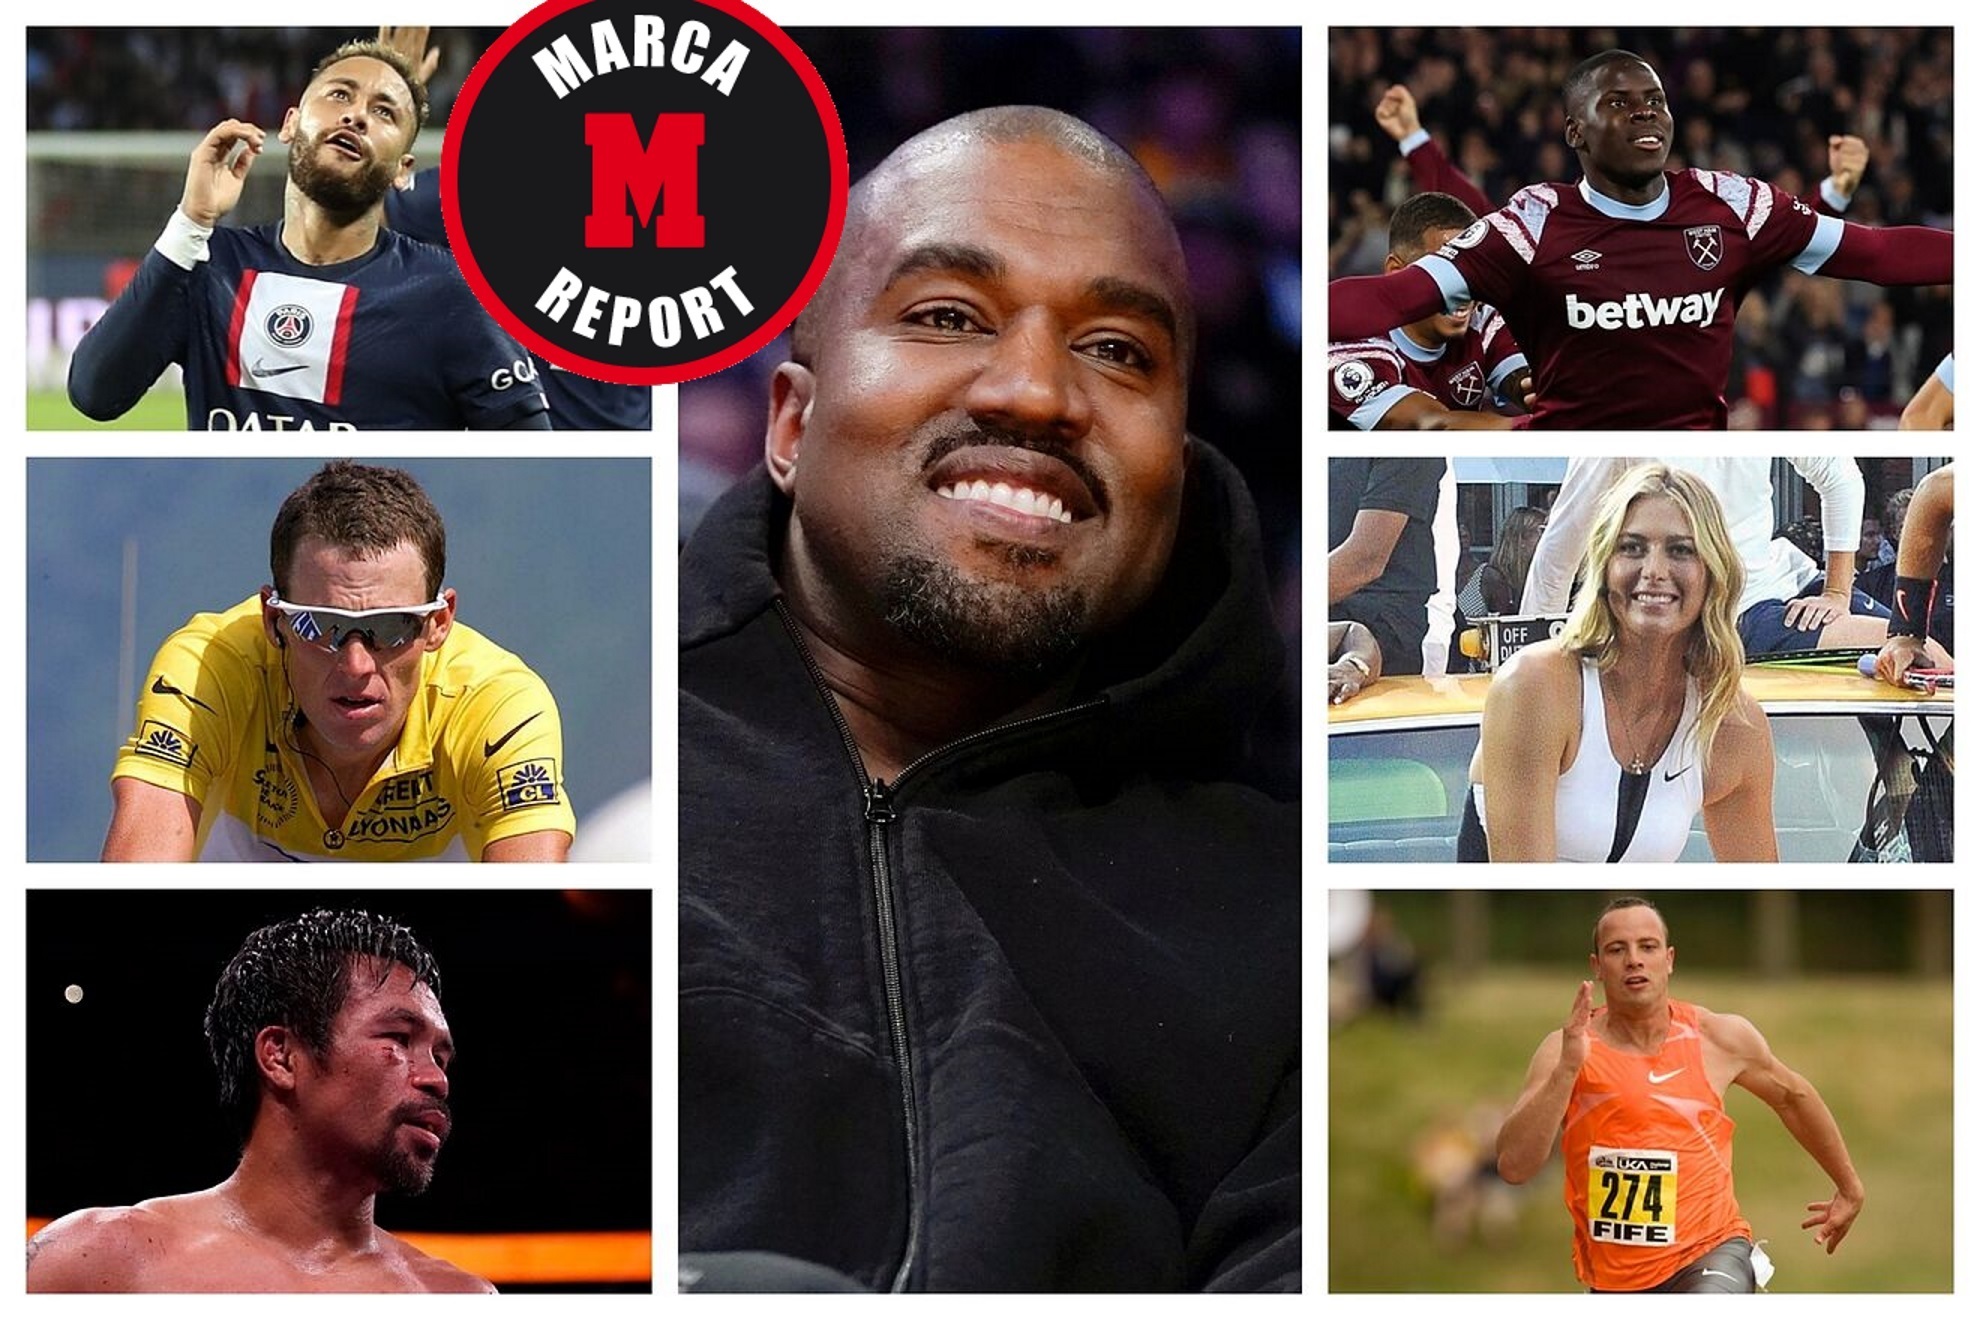 Kanye West and other high-profile separations from sports brands: A murder, a rape, a shooting, a loudmouth...